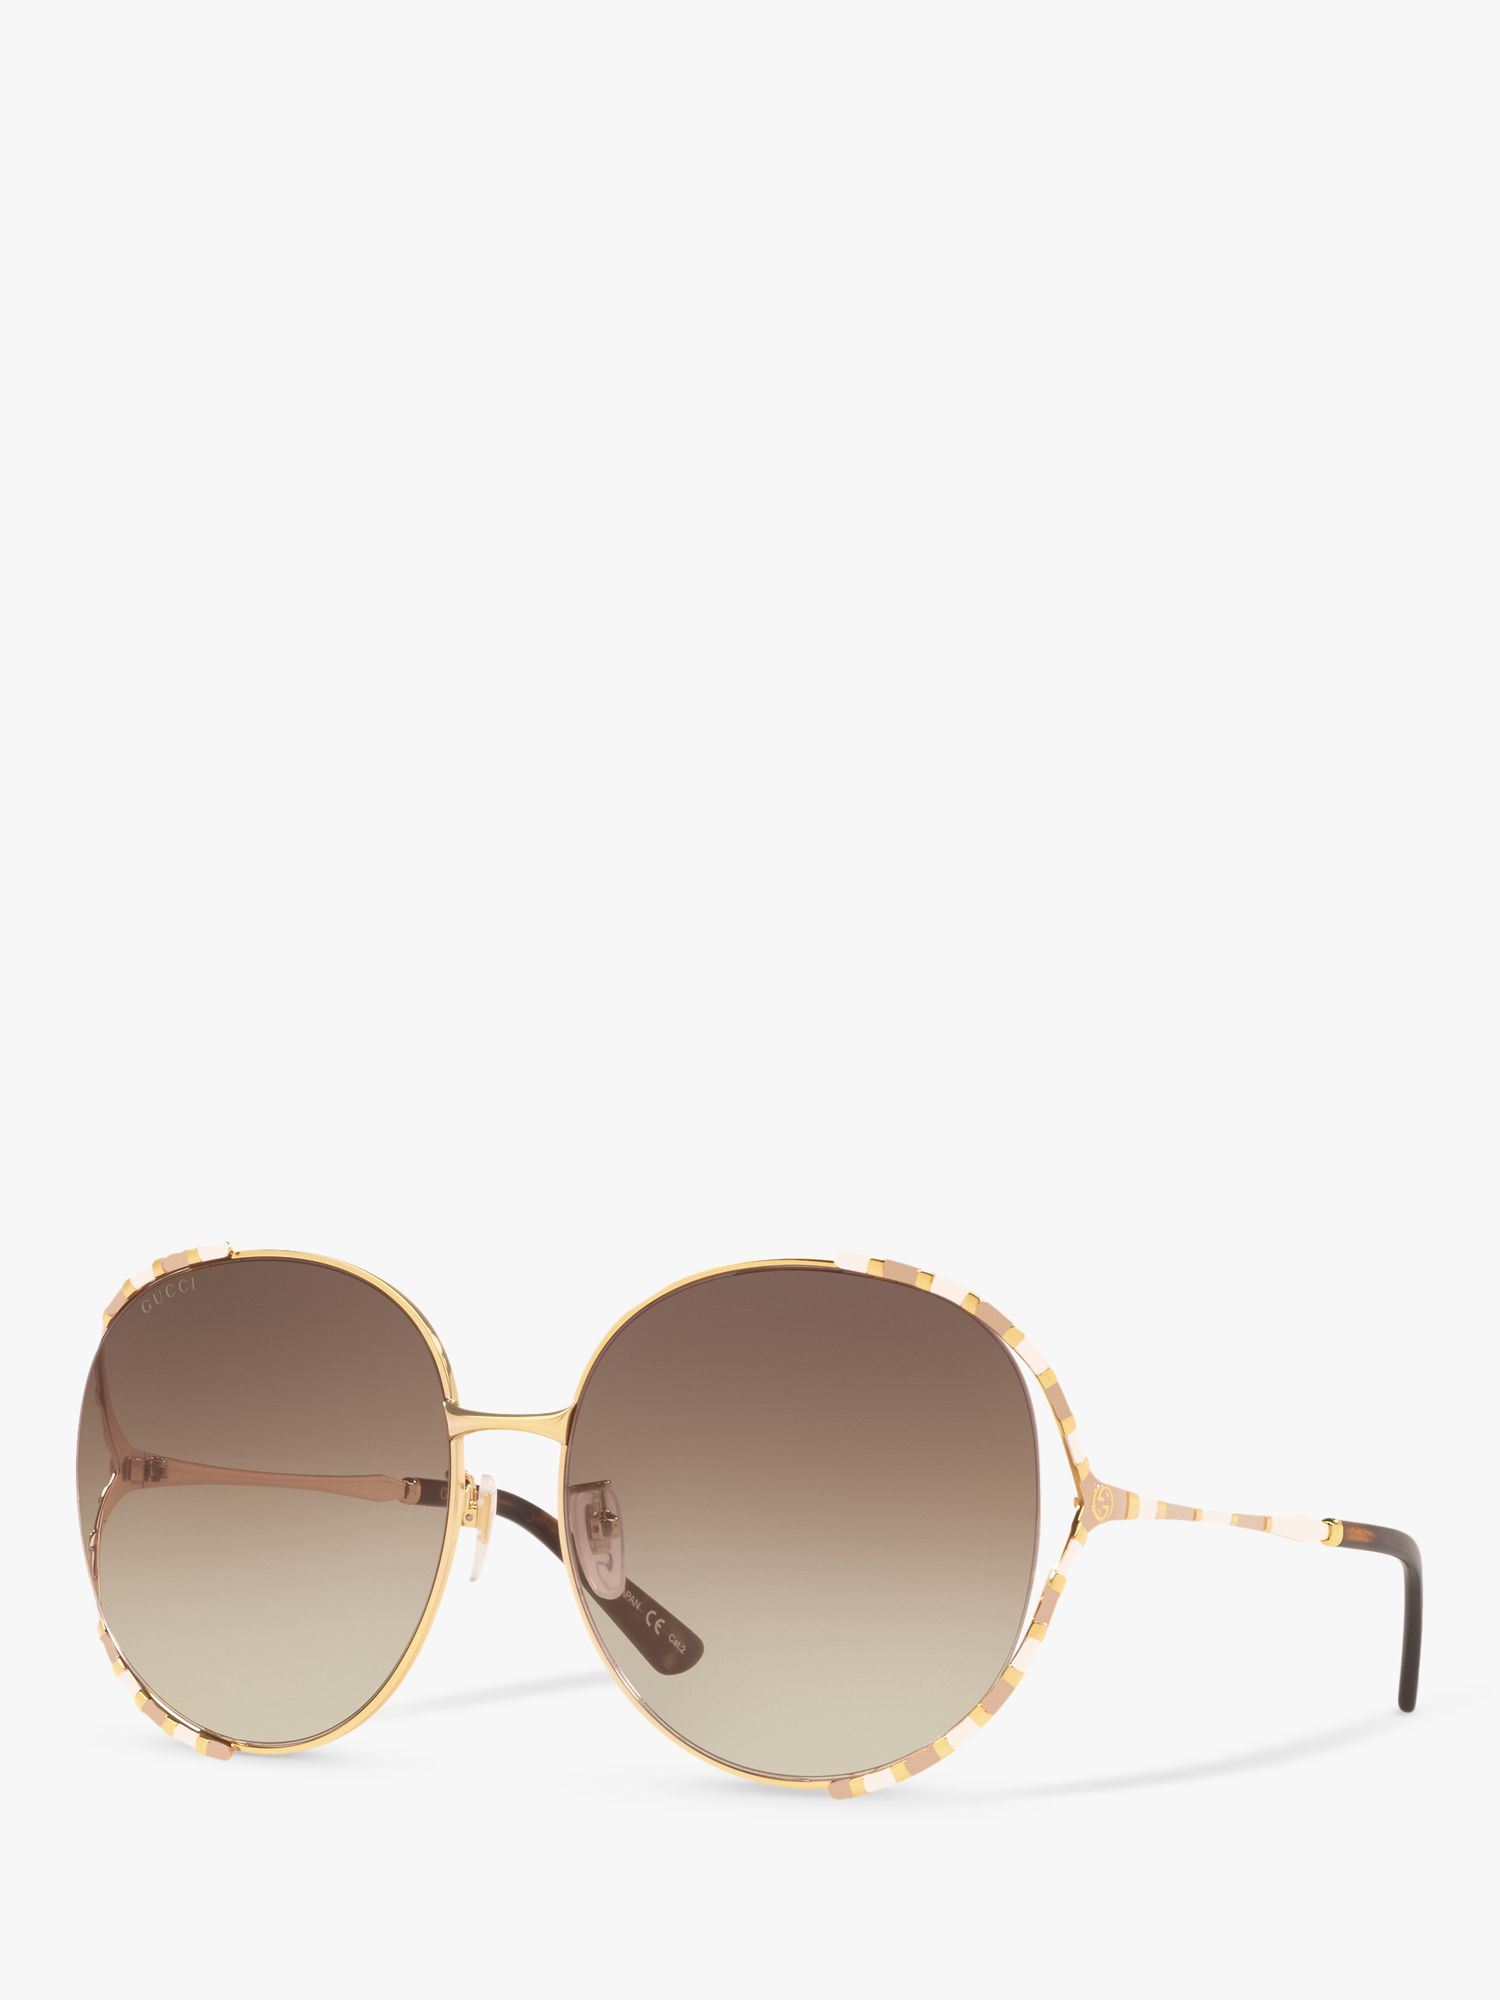 Gucci GG0595S Women's Oversized Oval Sunglasses, Gold/Brown Gradient at  John Lewis & Partners